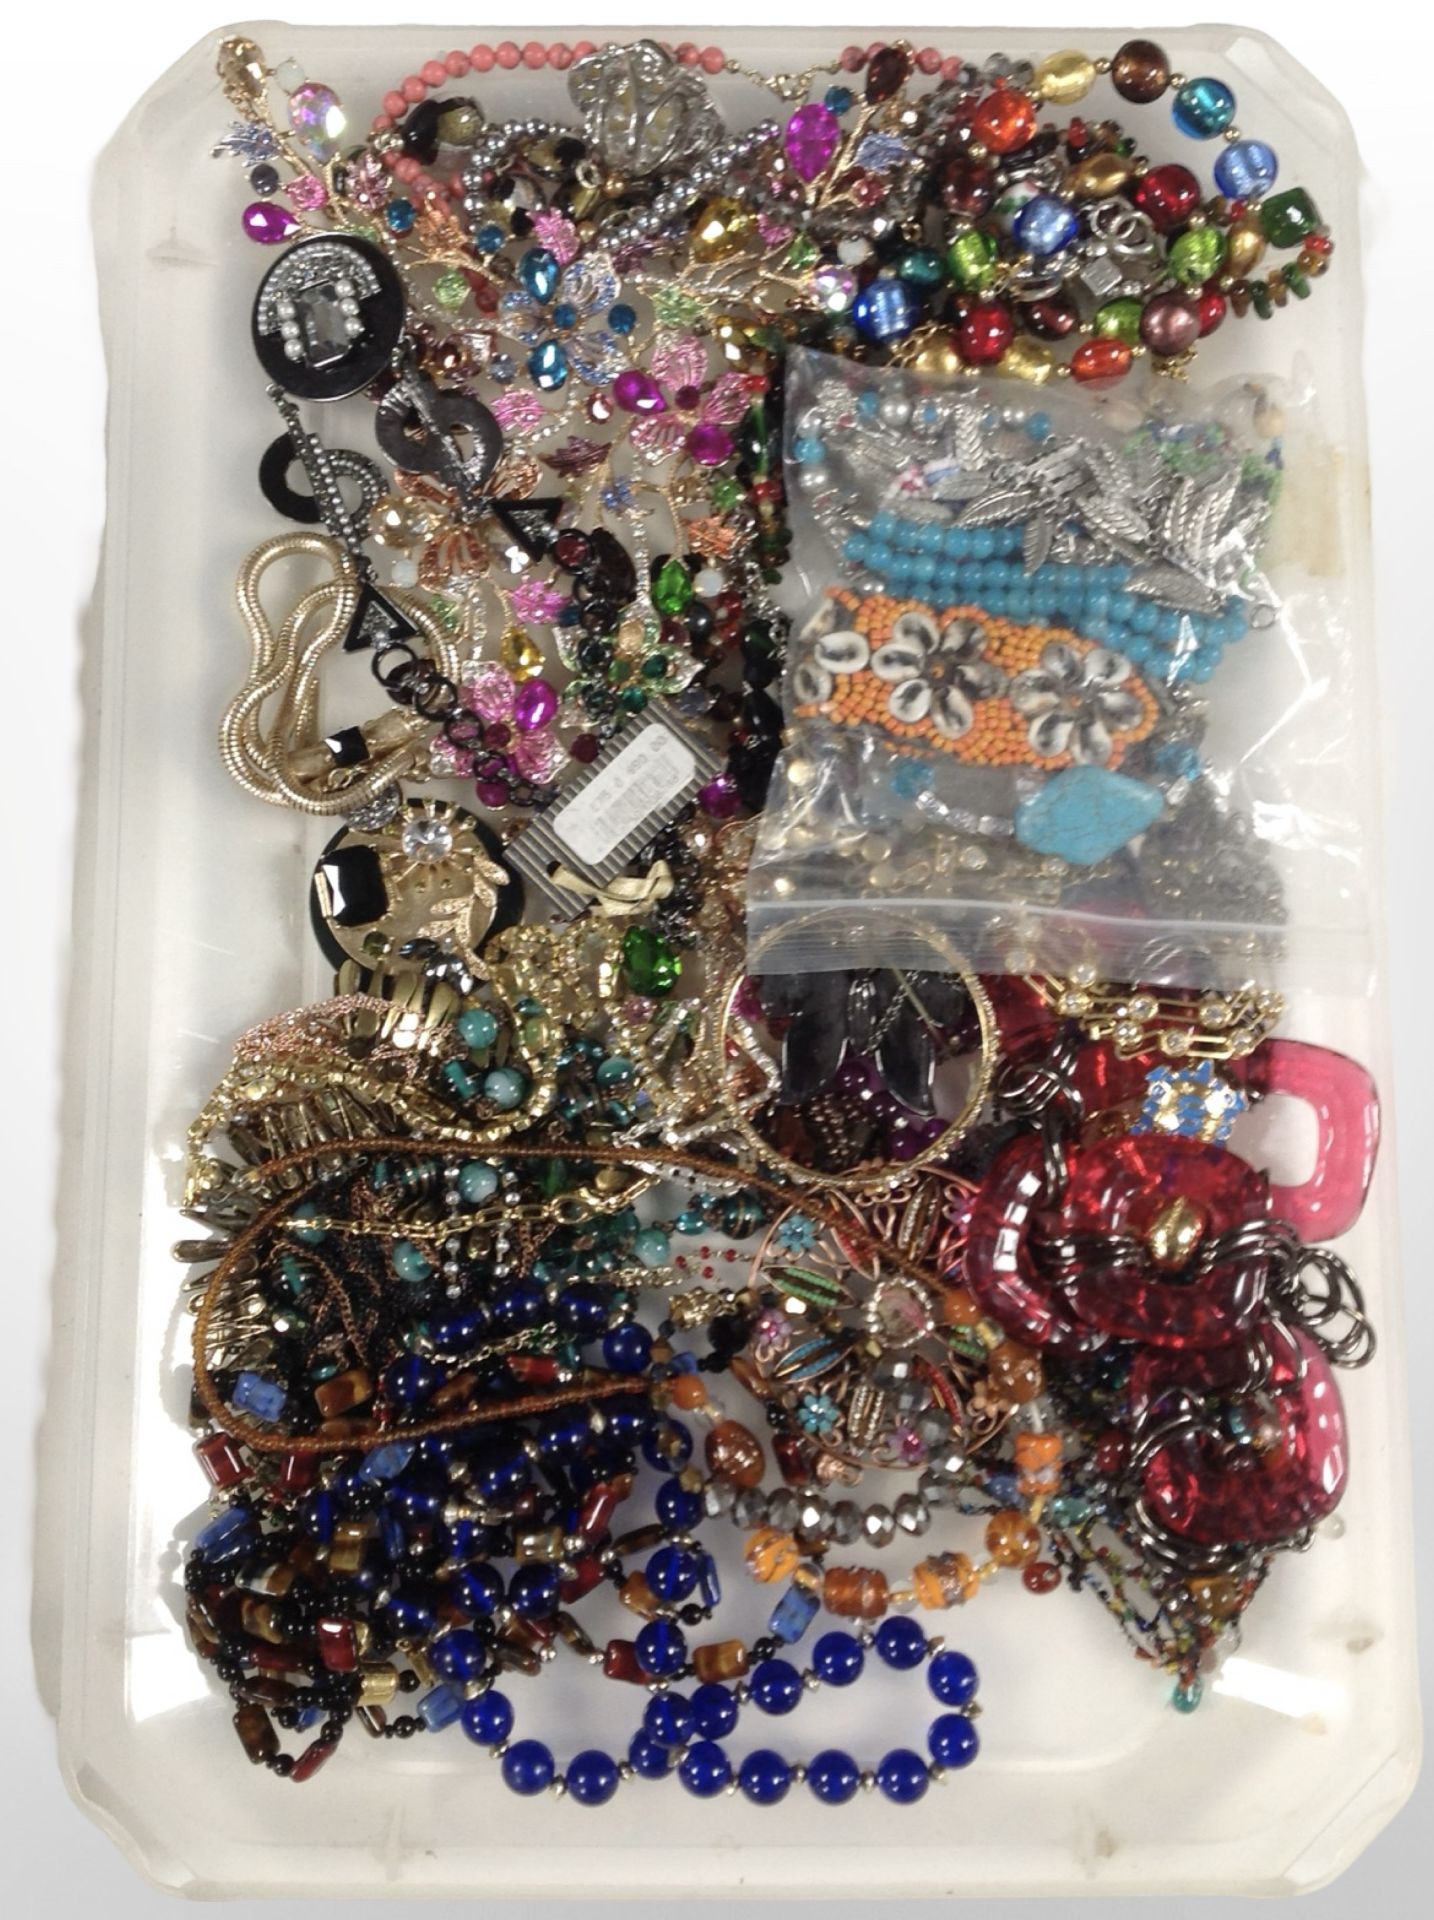 A collection of costume jewellery, glass bead-work pieces, brooches, bangles, etc.